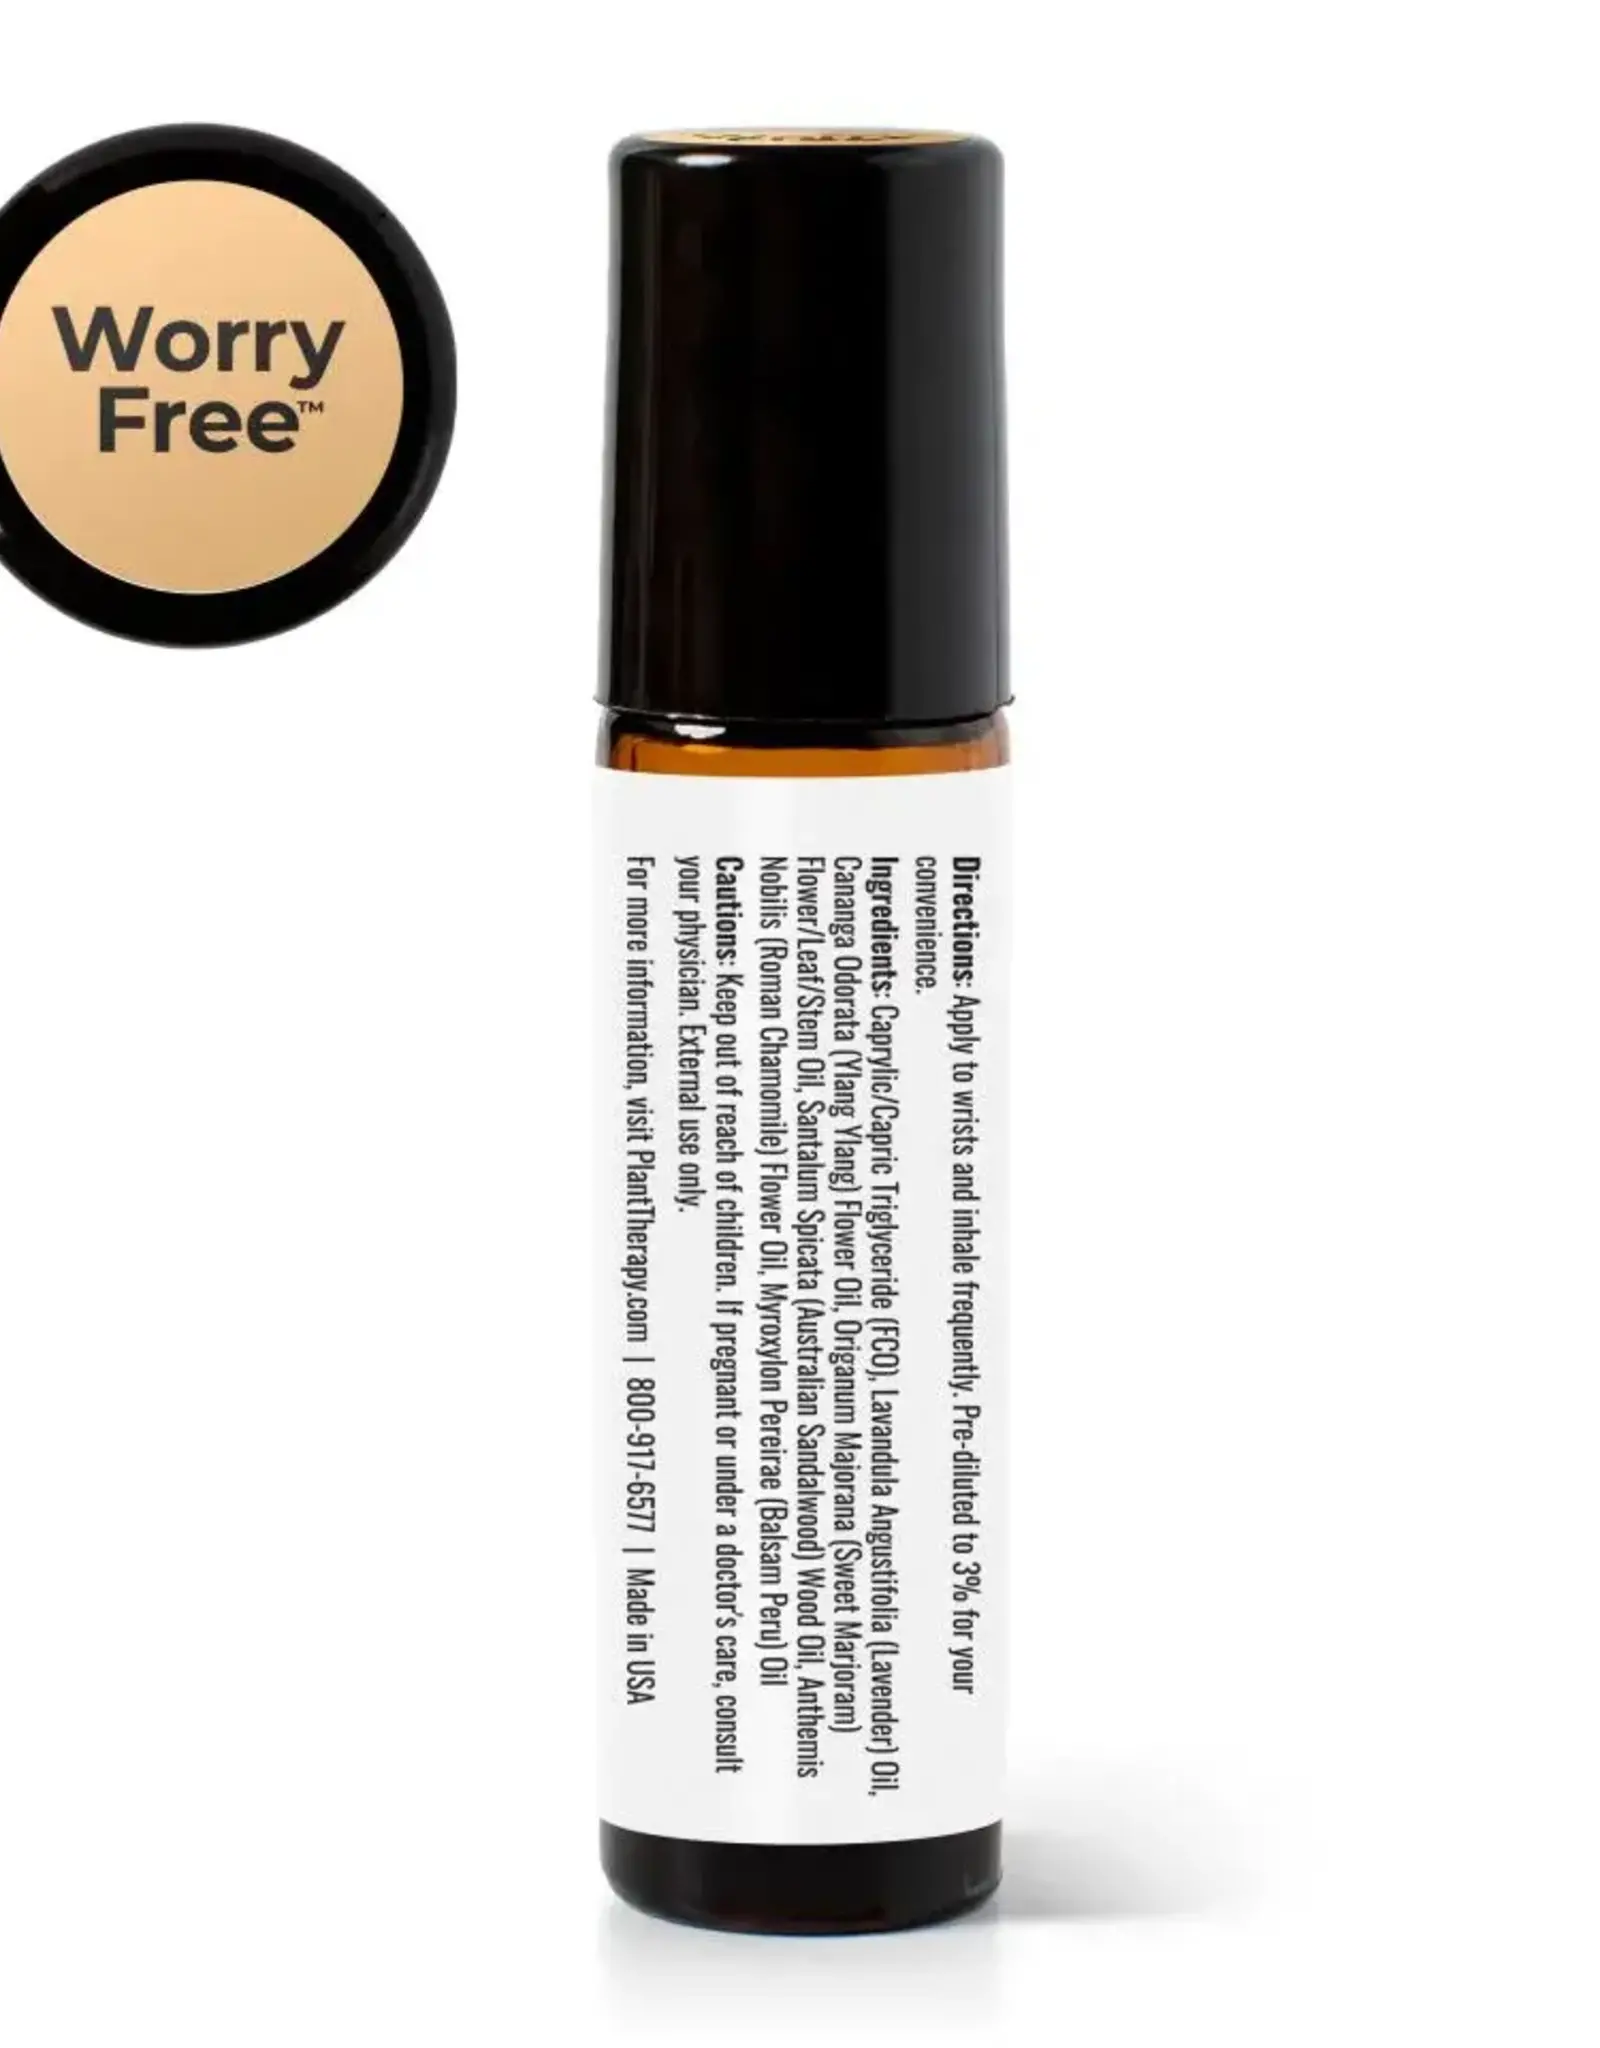 Plant Therapy Worry Free Essential Oil Pre-Diluted Blend Roll  - 10ml